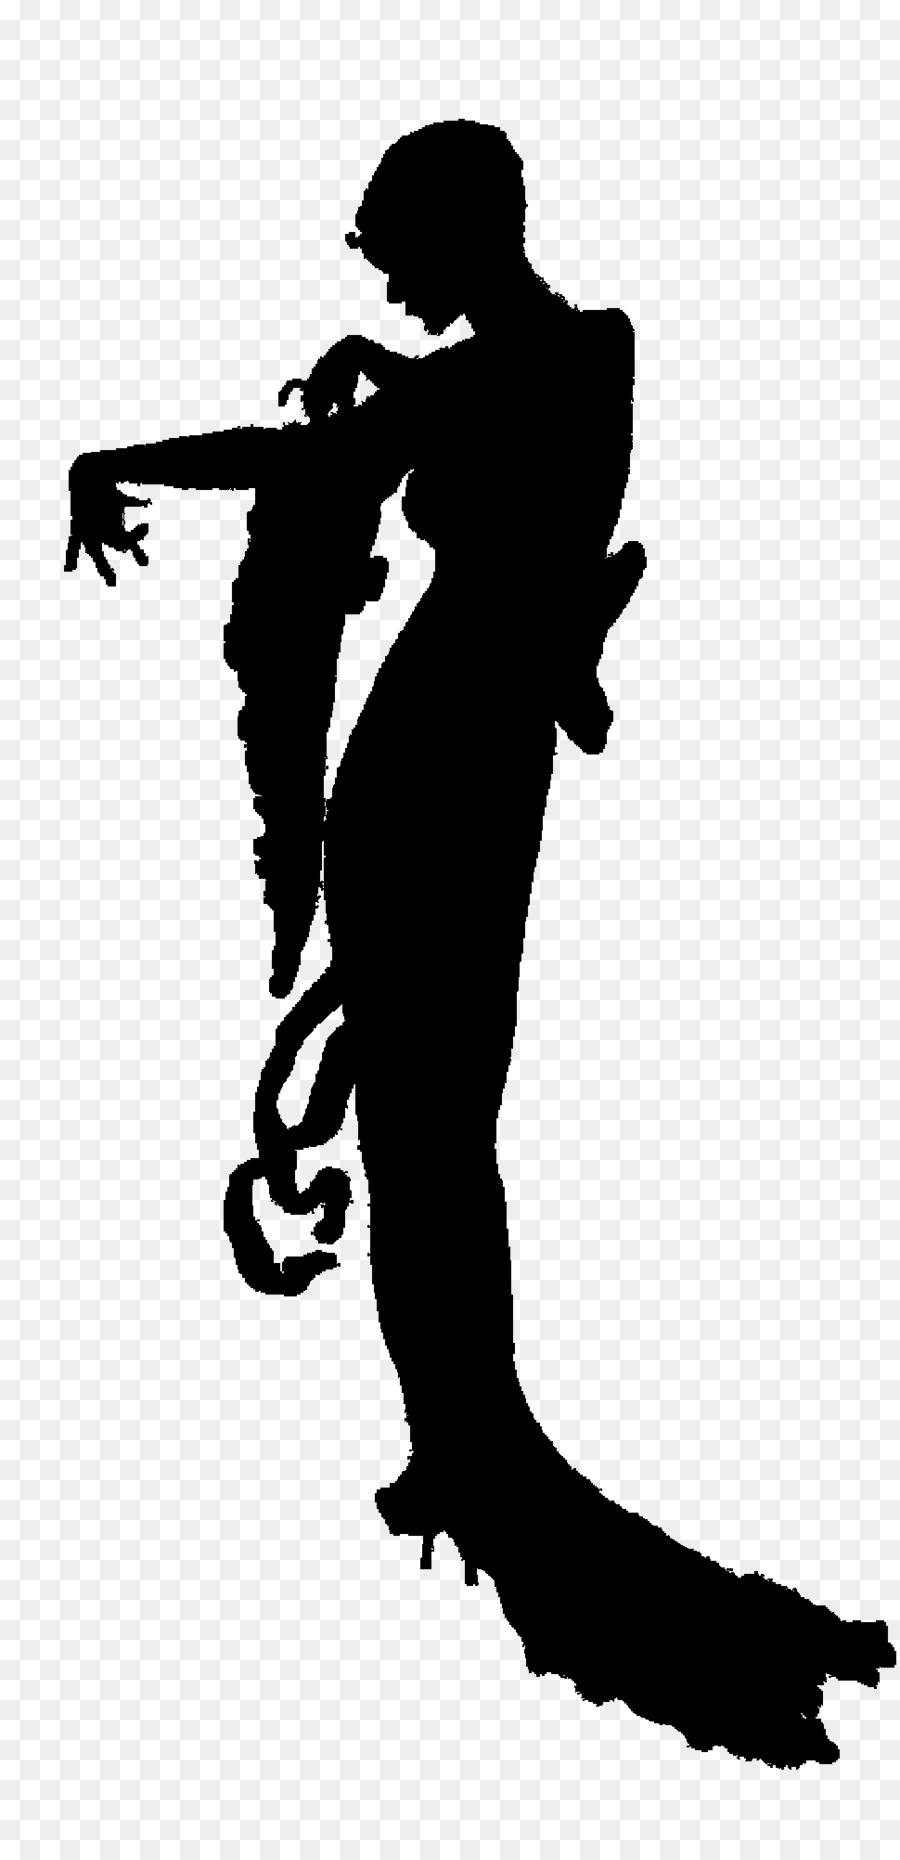 Silhouette Actor Film - actor png download - 970*2000 - Free Transparent Silhouette png Download.